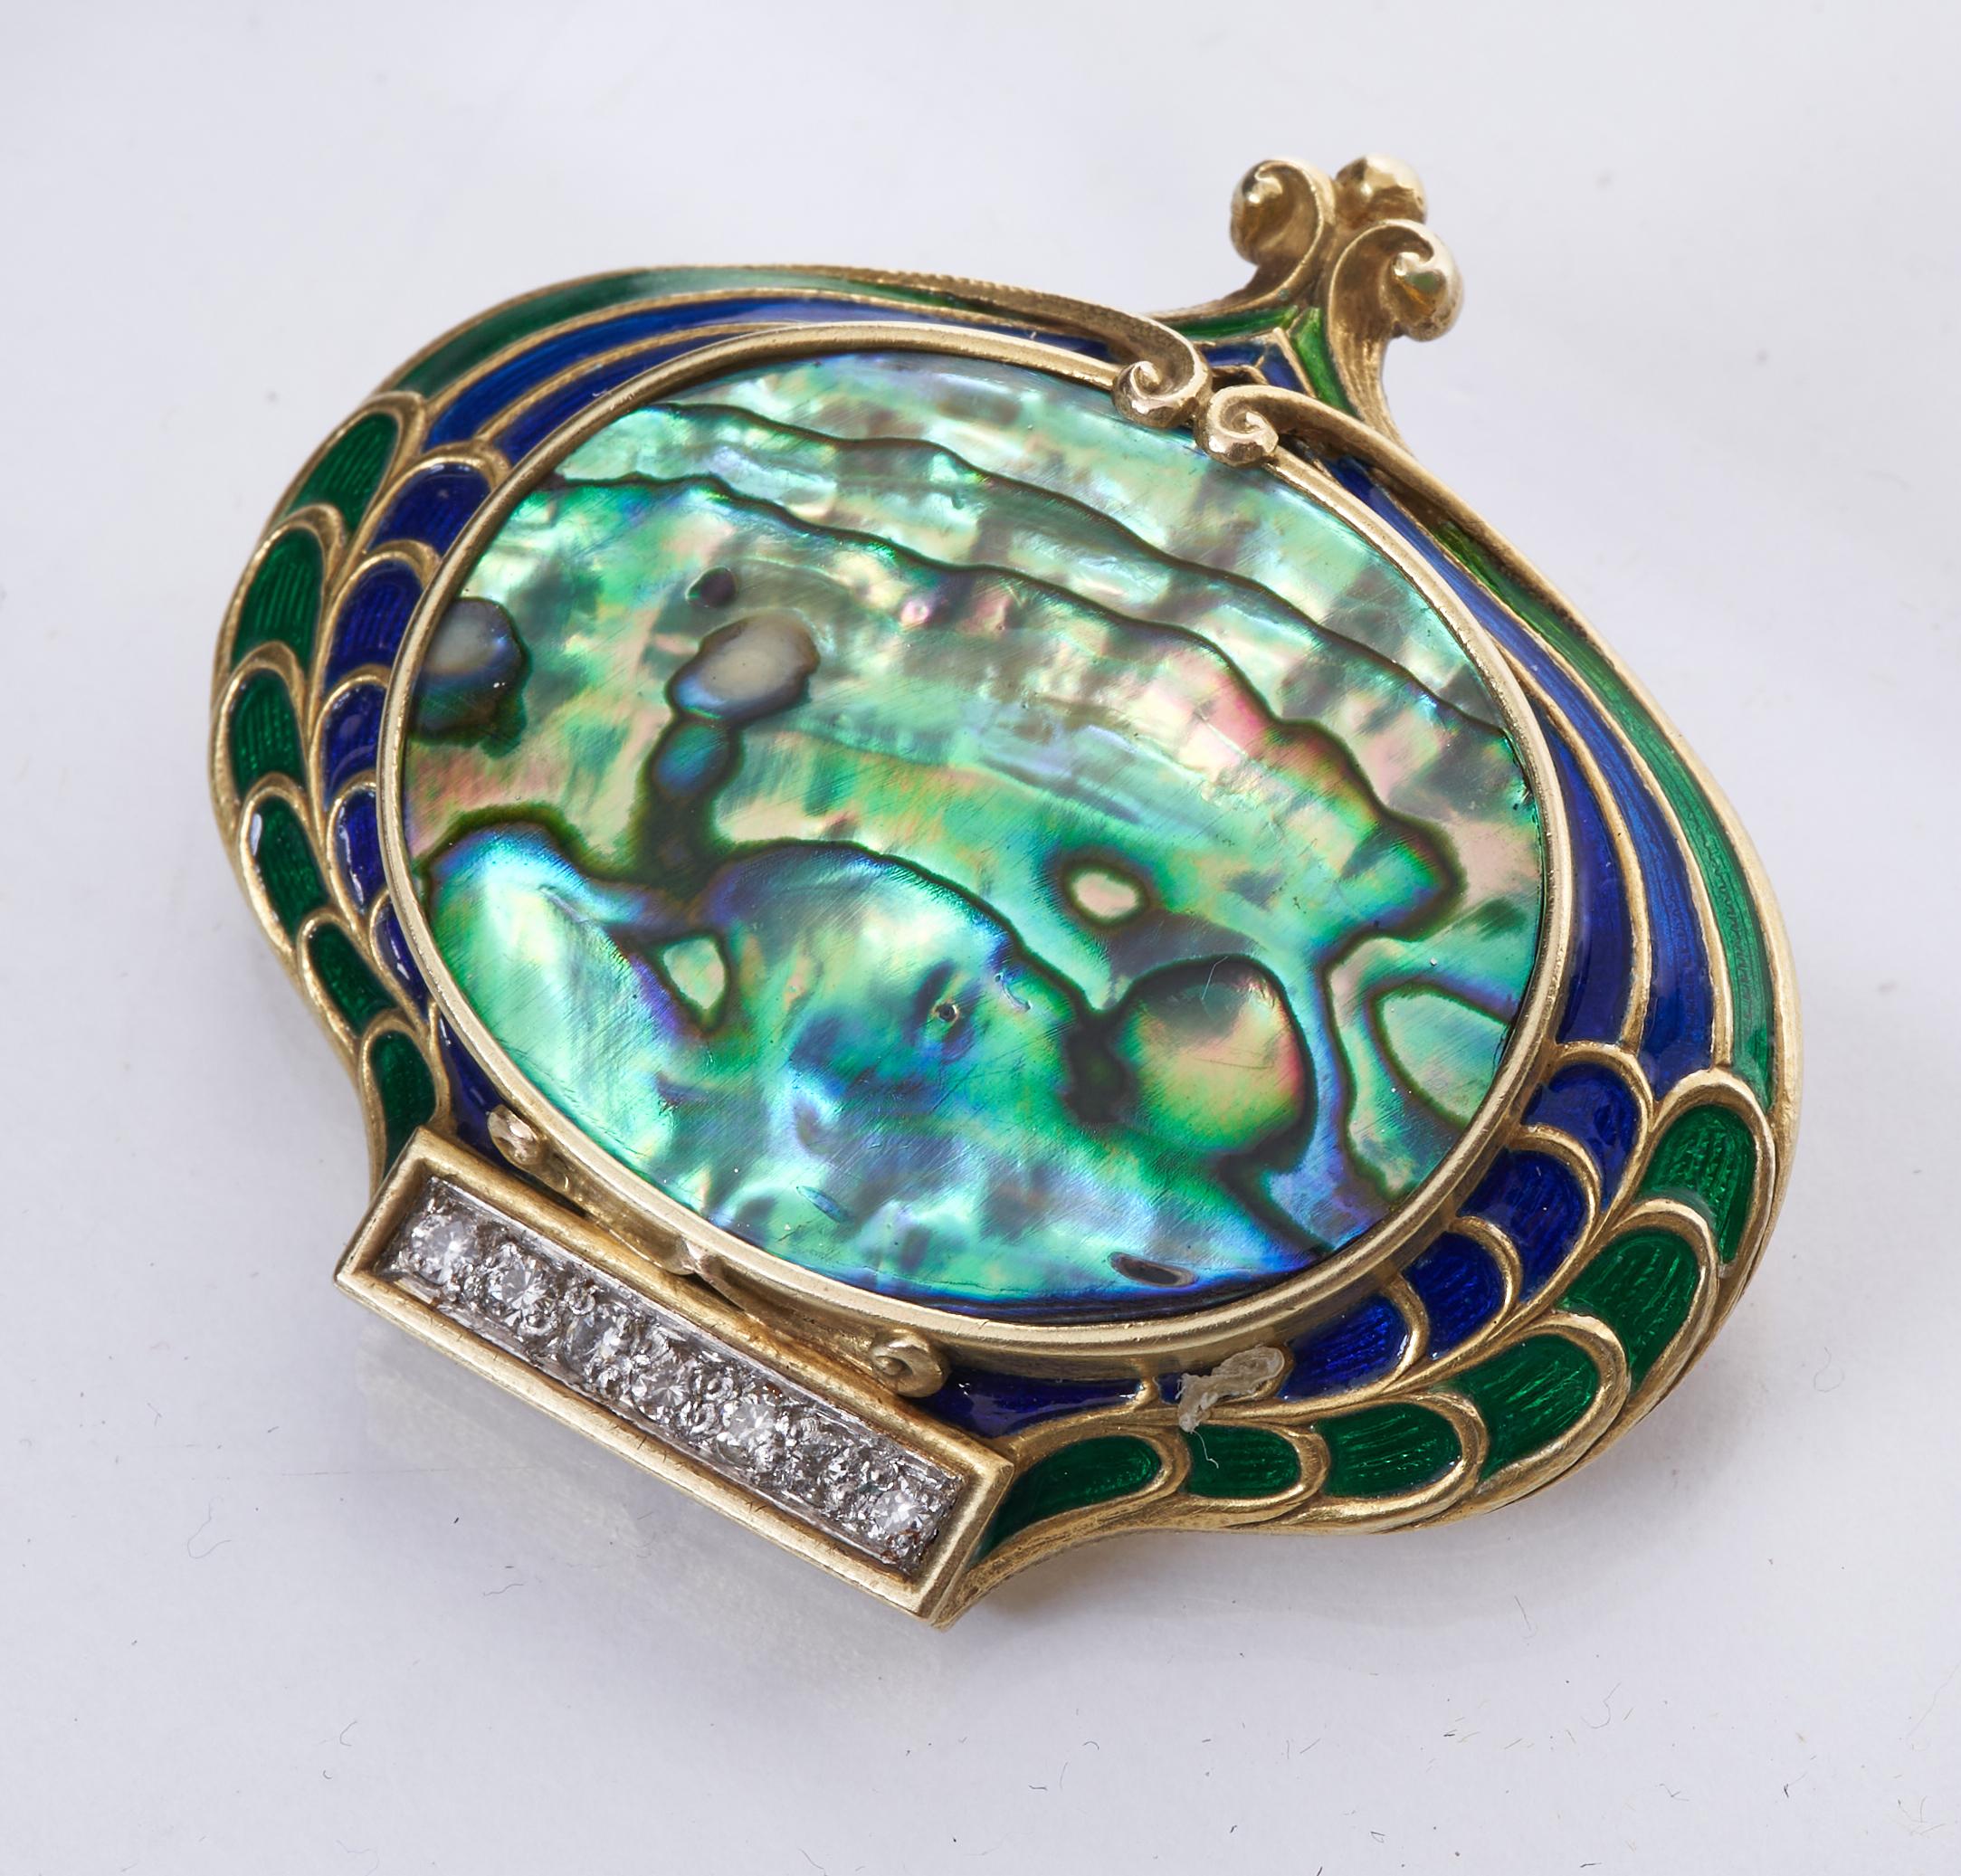 Museum quality Marcus & Company signed art nouveau brooch. Enameled 18k gold with diamonds and Polished Abalone
Dimensions: 1.75